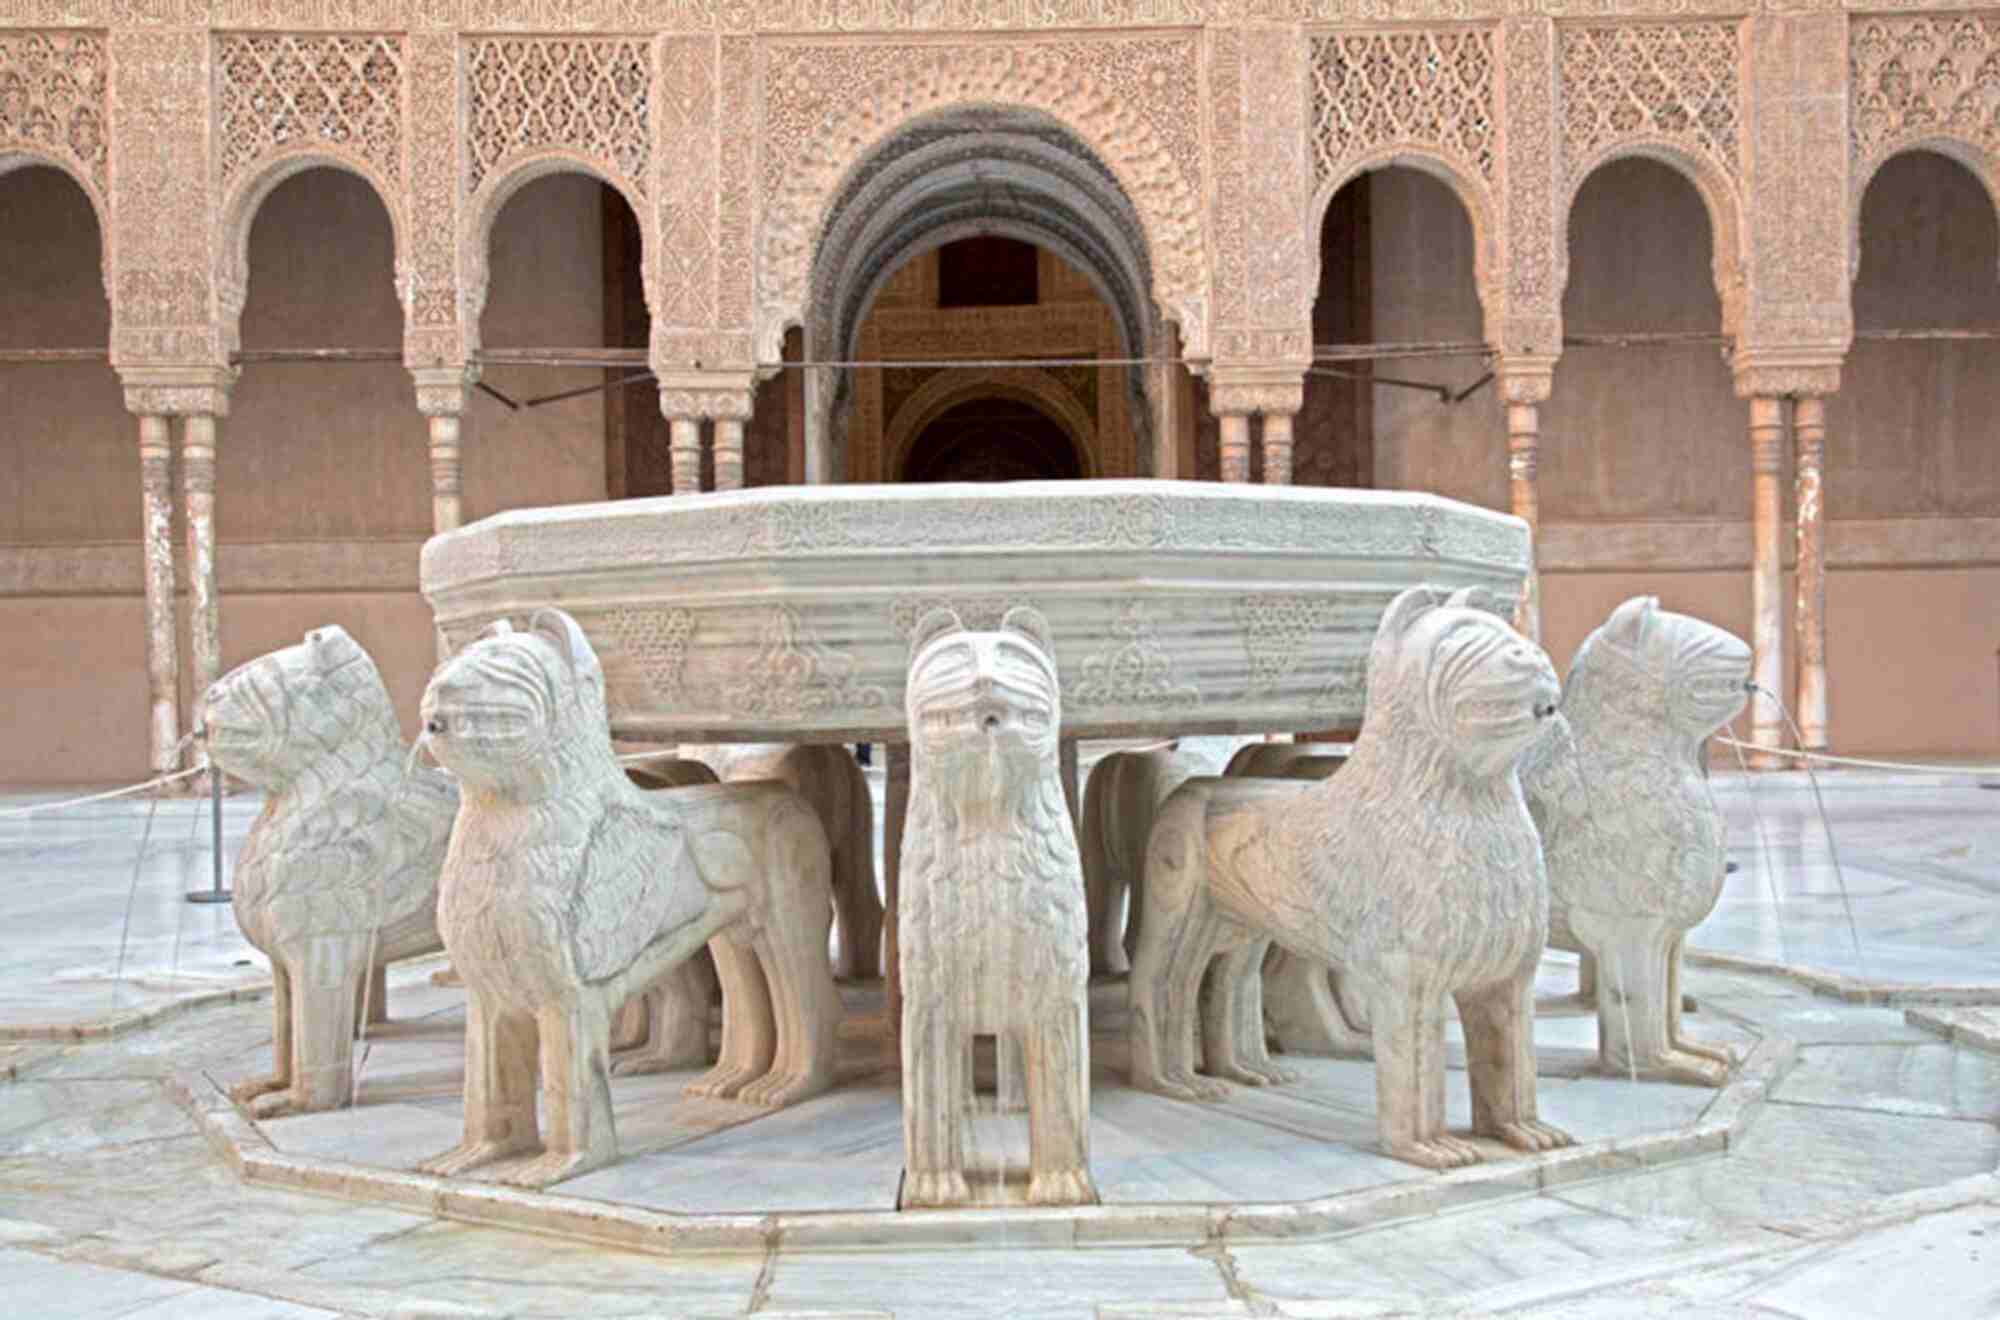 Lions courtyard in the Alhambra